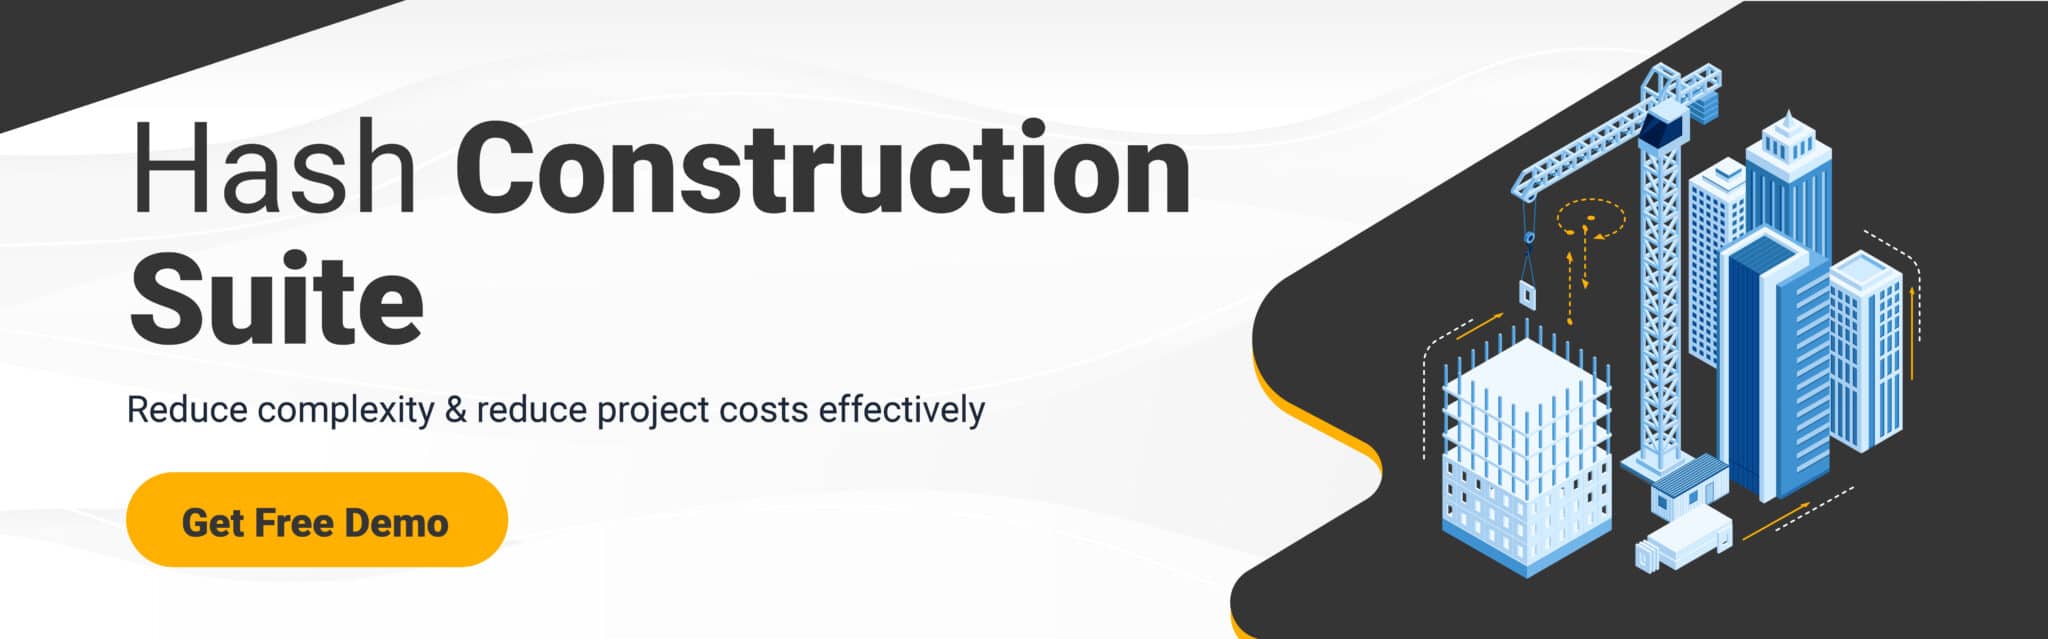 software for construction company (https://www.hashmicro.com/hash-construction-software)